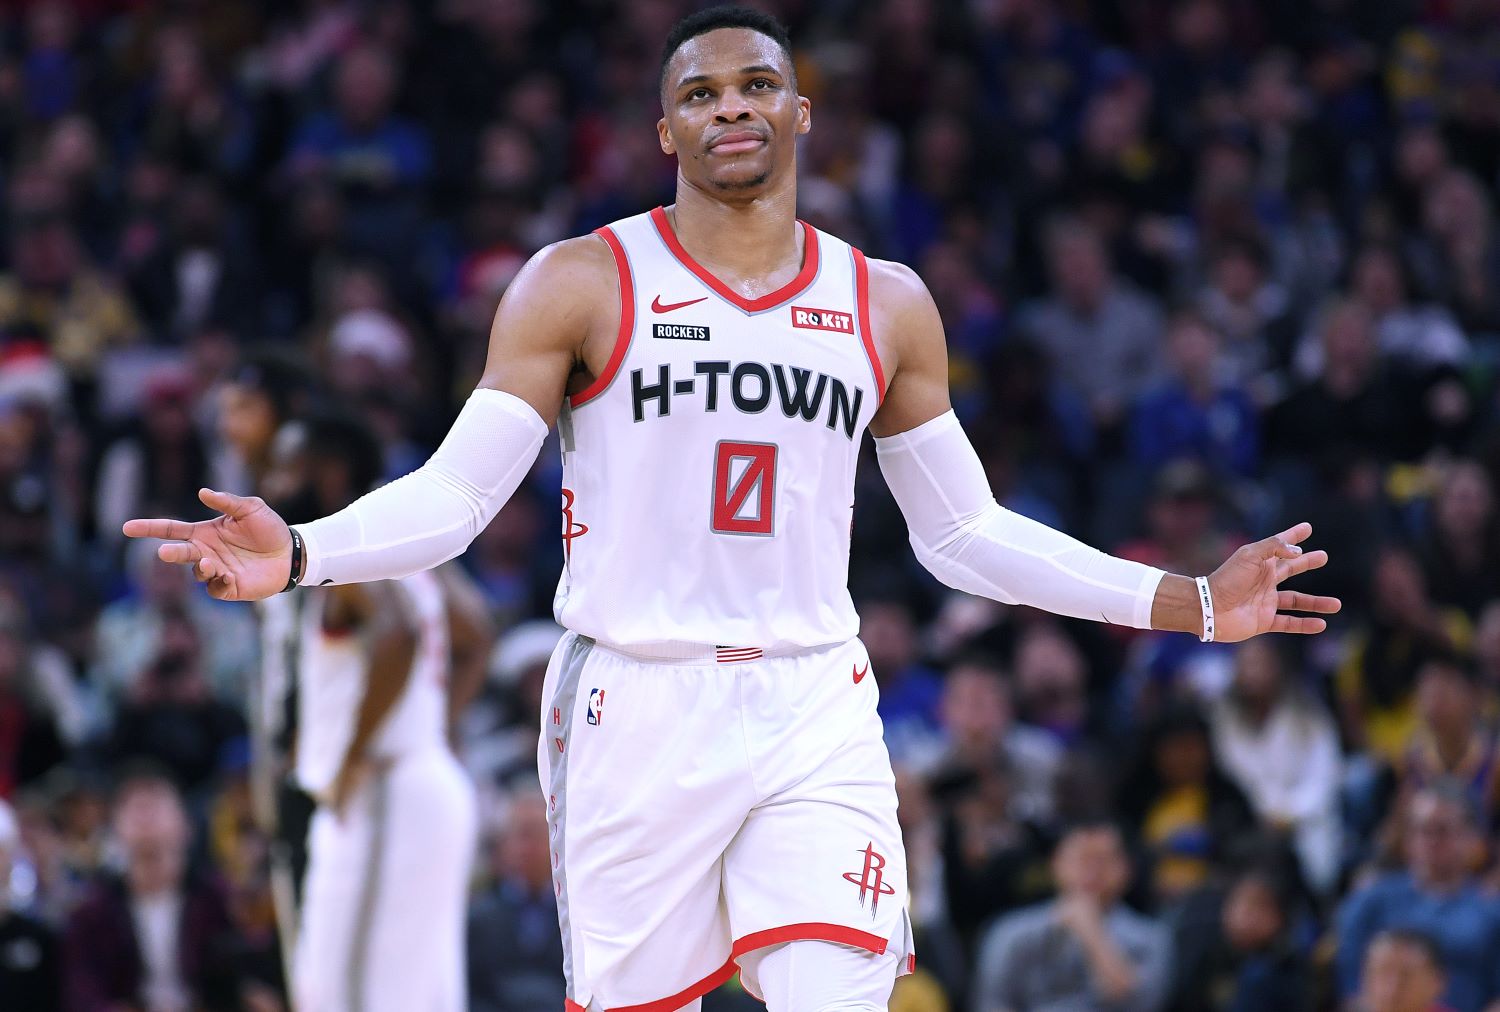 With $132 million remaining on his contract, Russell Westbrook may have a hard time finding a way to escape from the Houston Rockets if NBA teams don't want to pay that price.